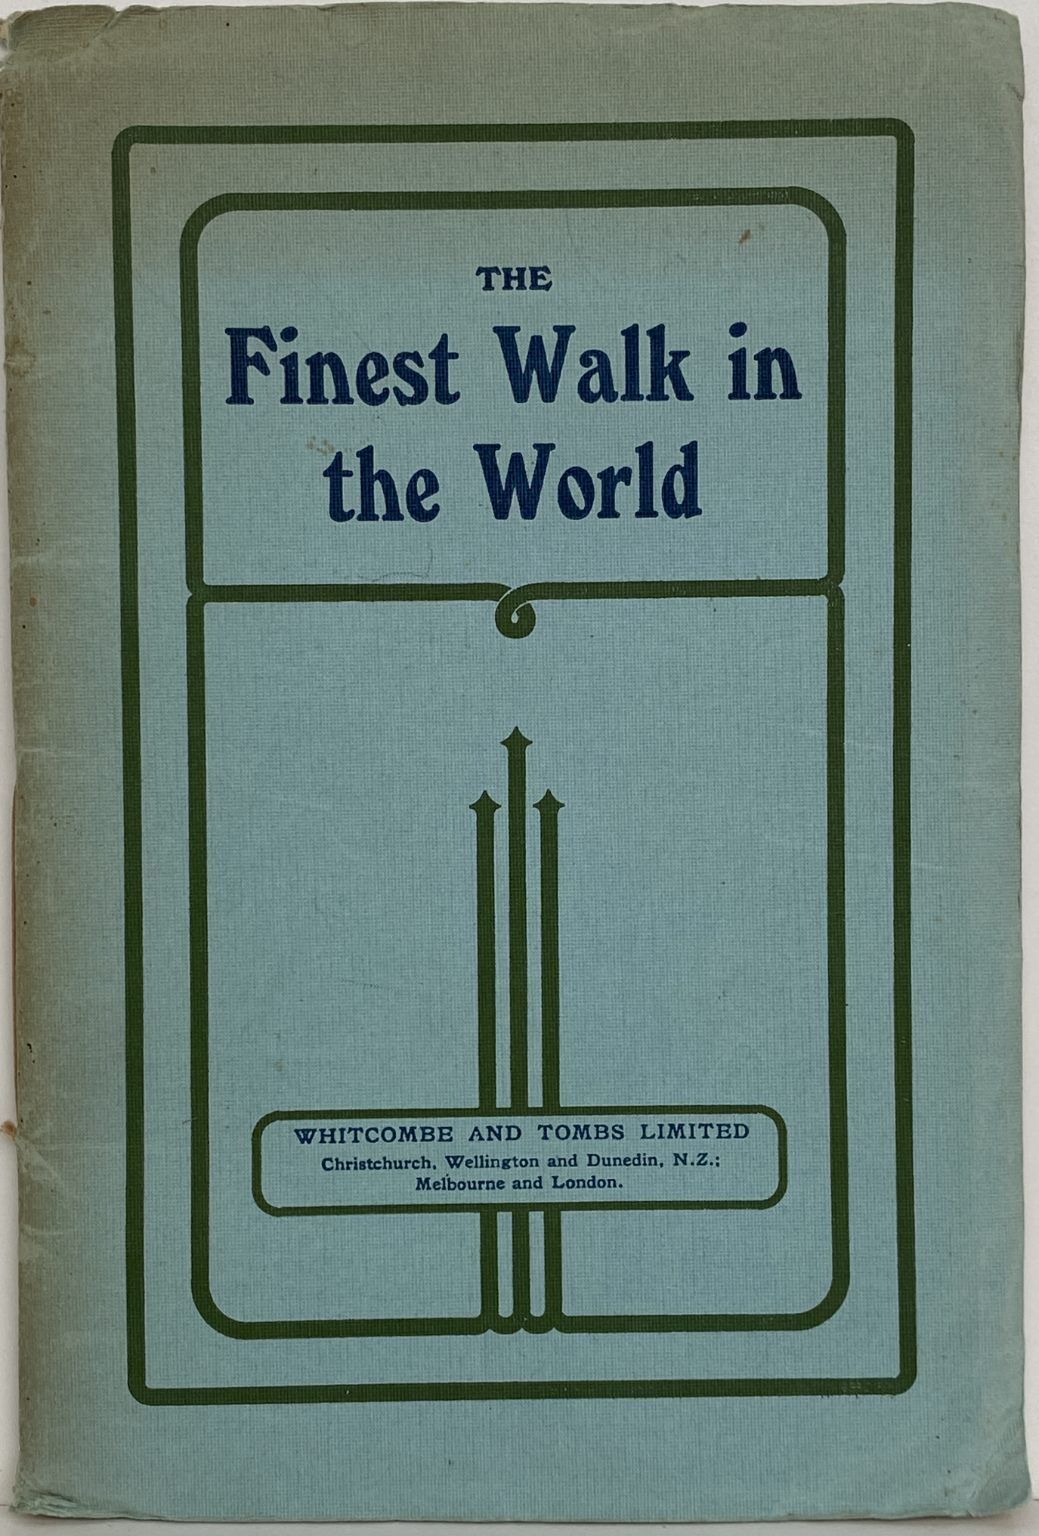 THE FINEST WALK IN THE WORLD